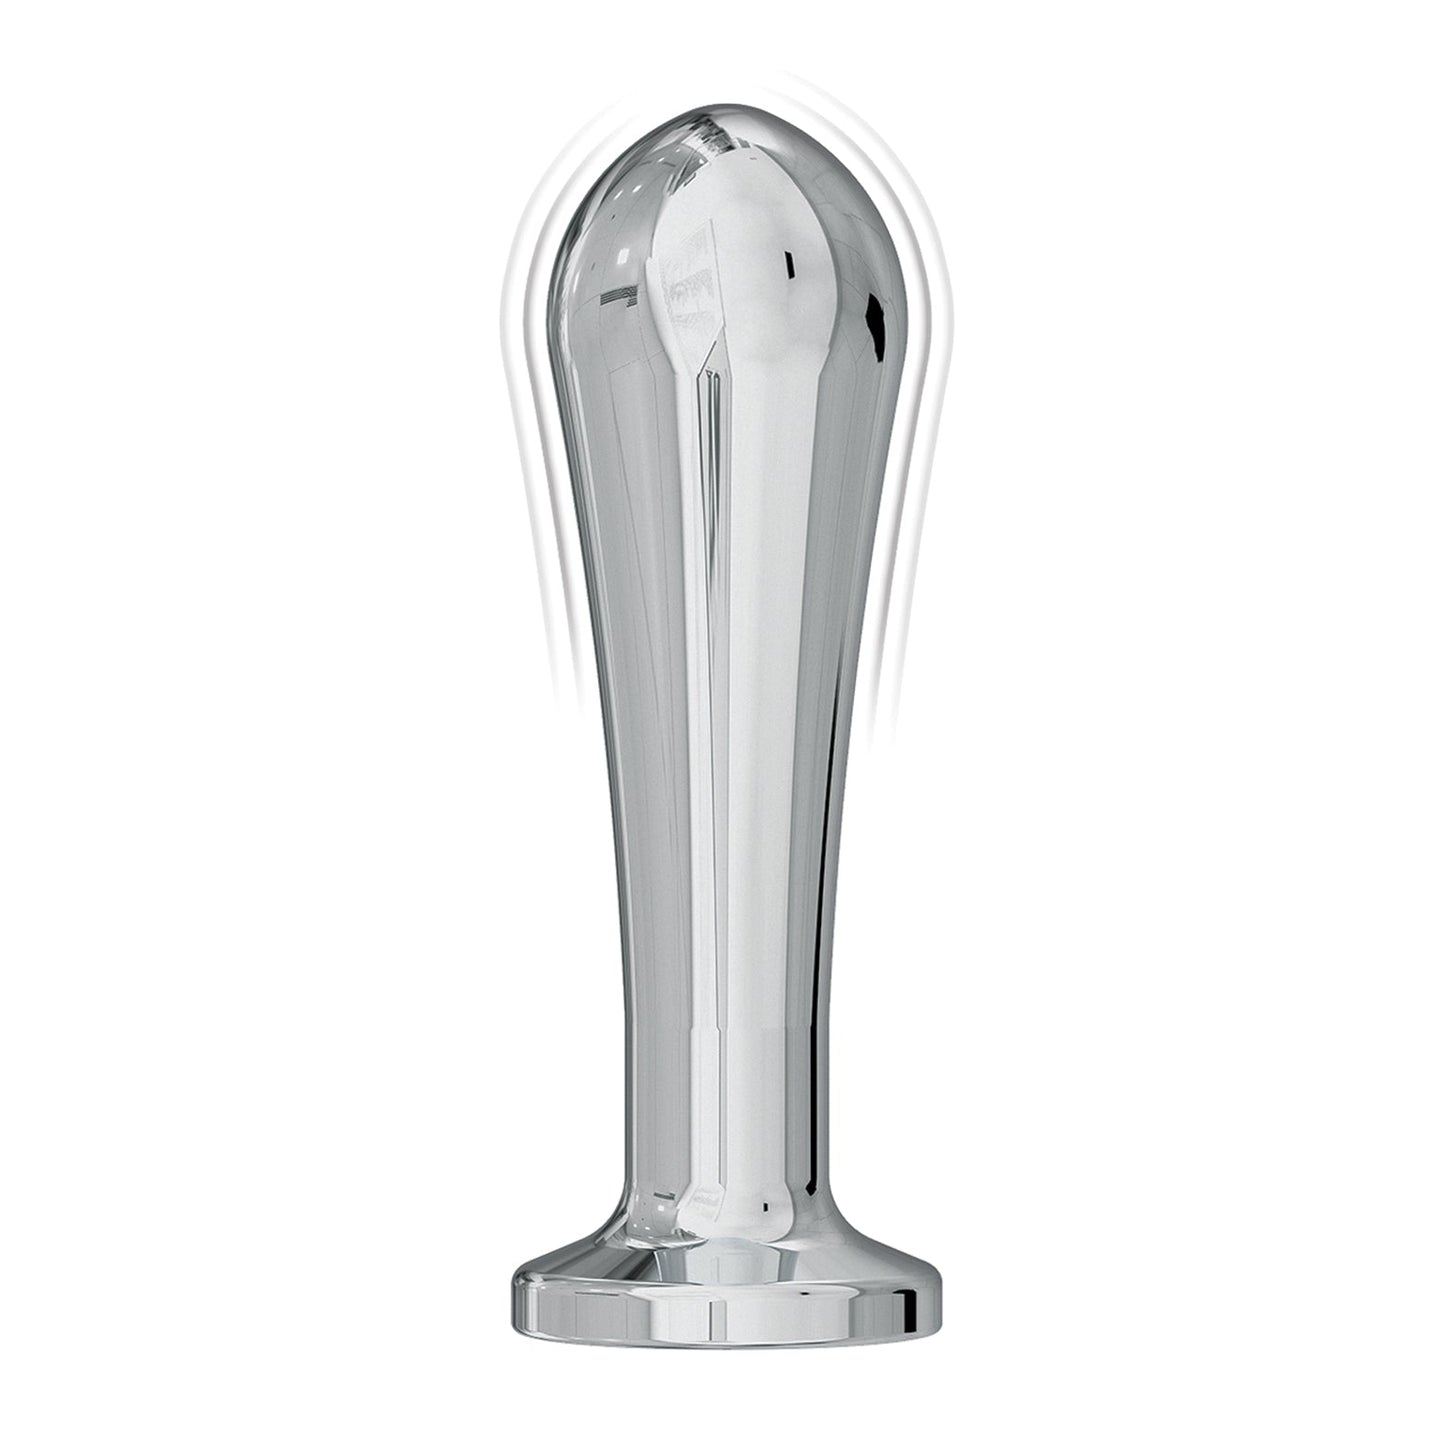 Ass-sation Remote Vibrating Metal Anal Bulb - Silver